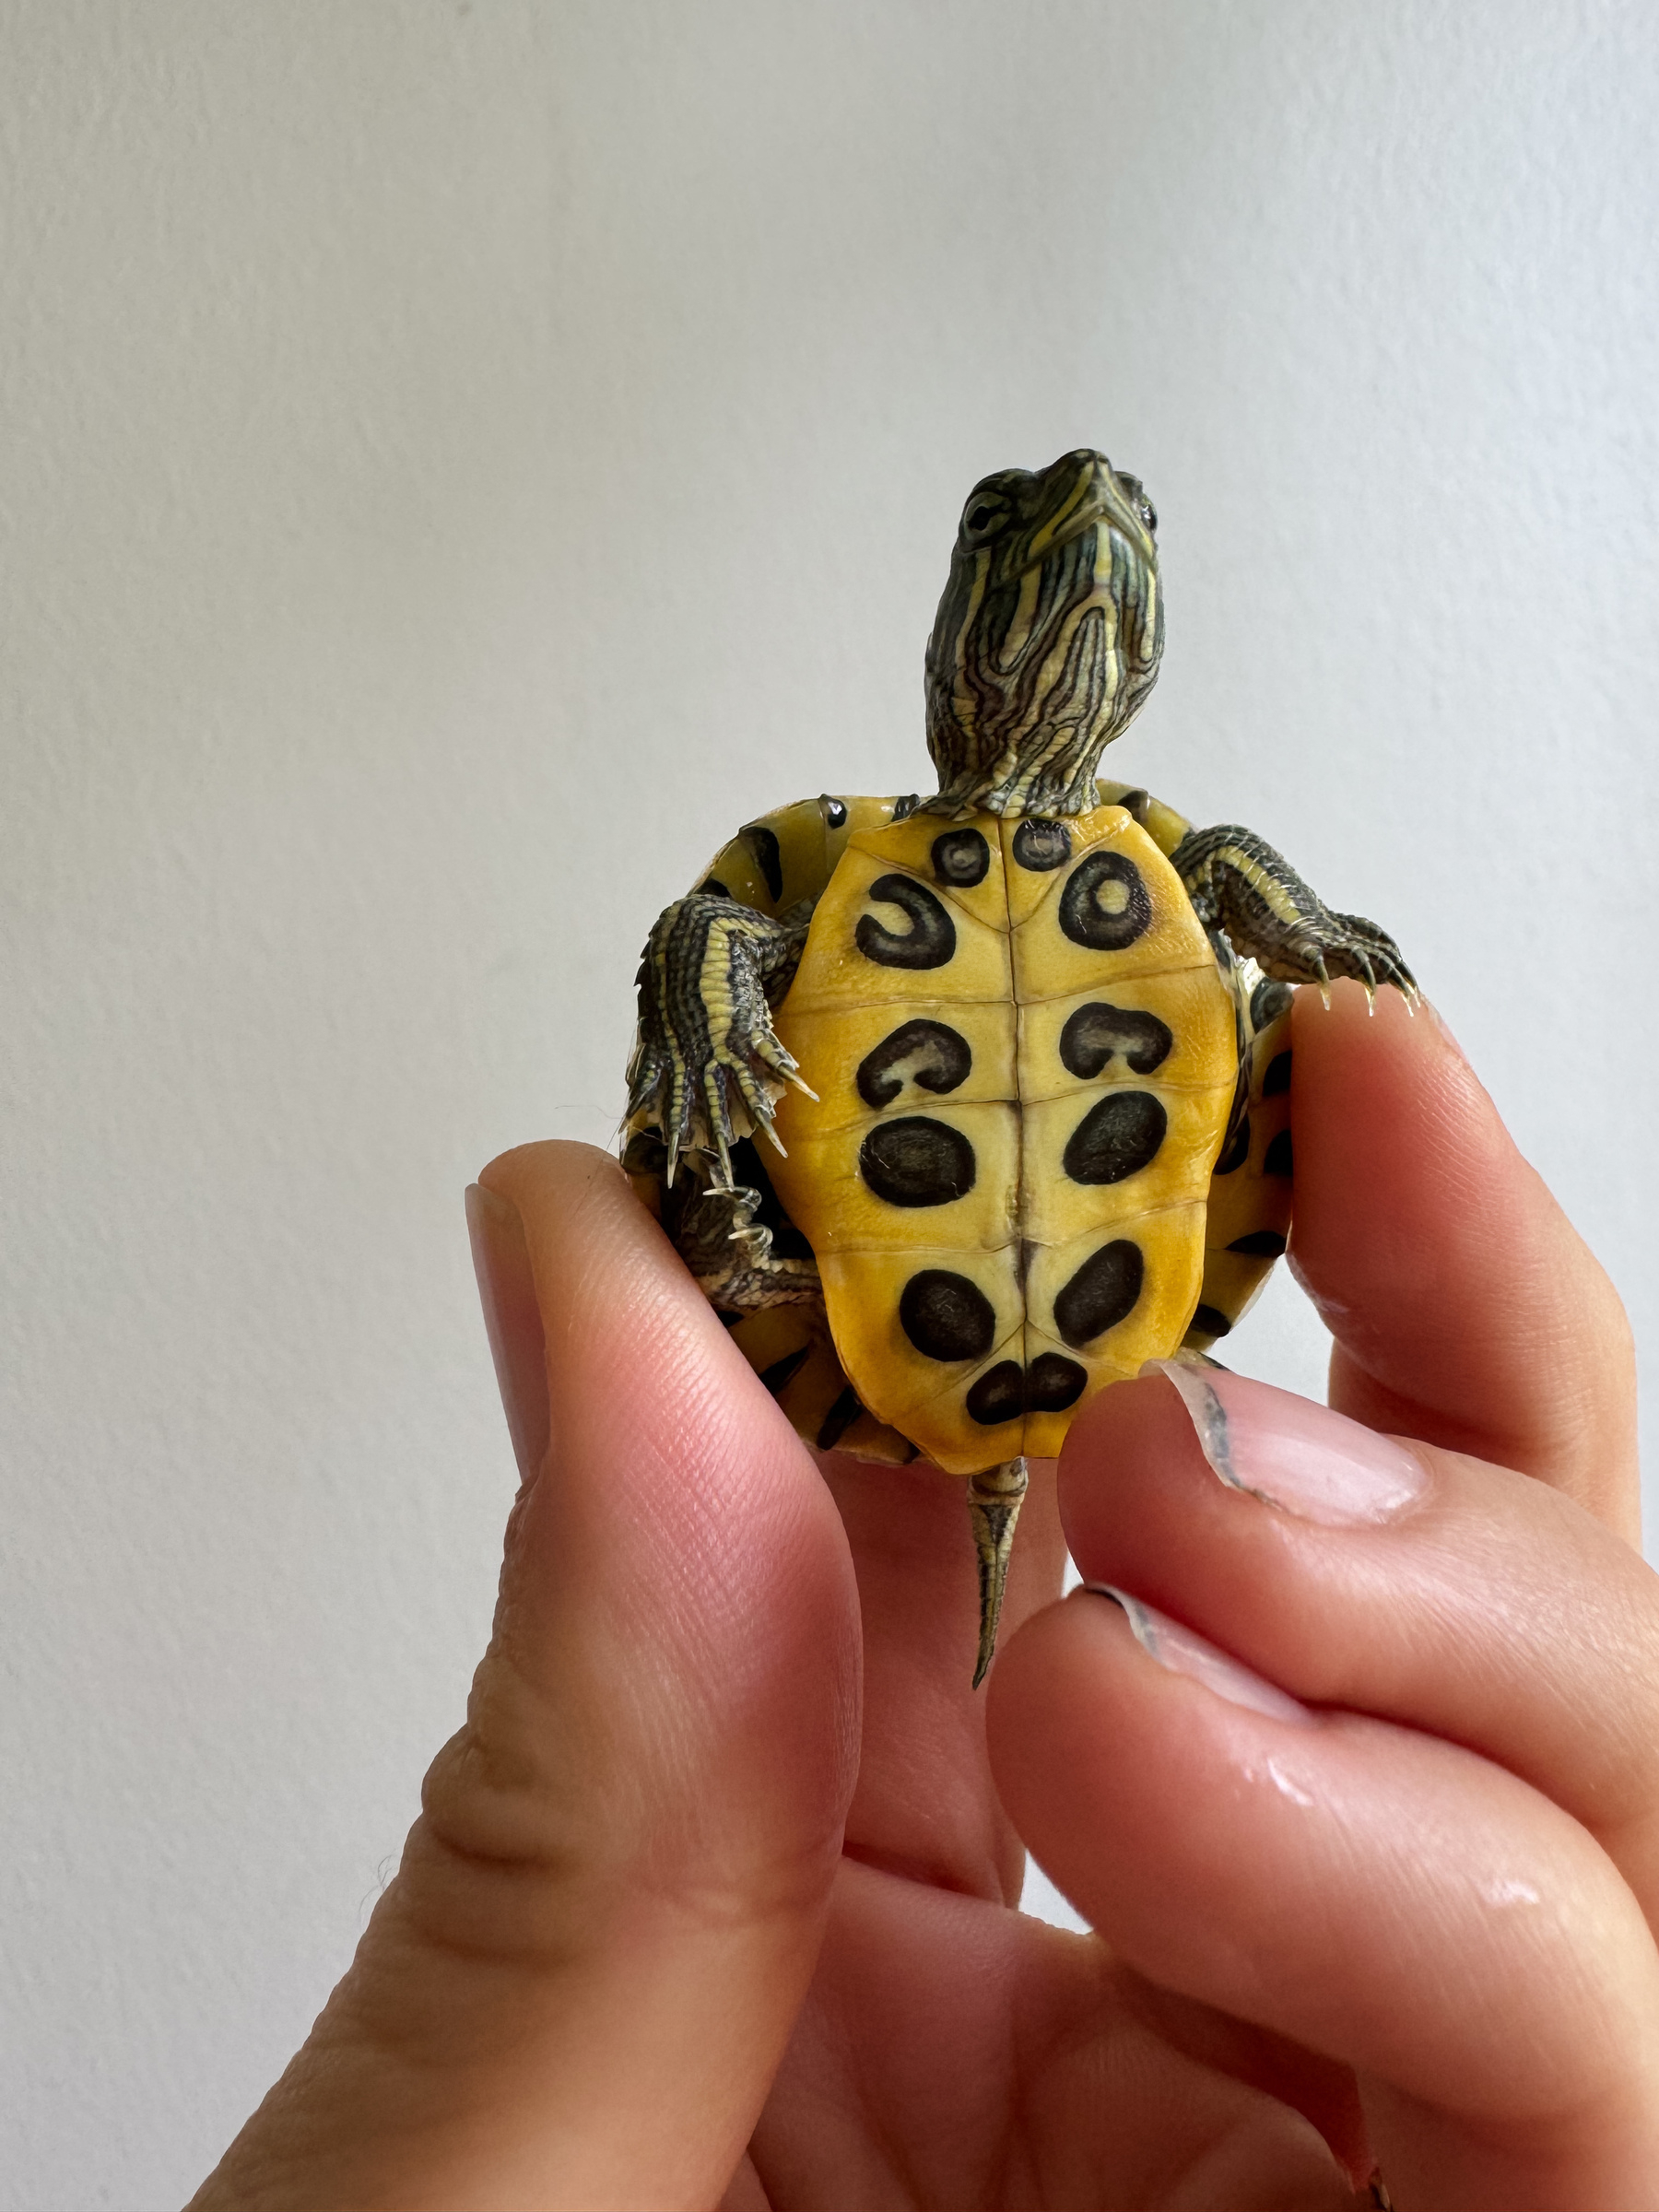 A baby turtle